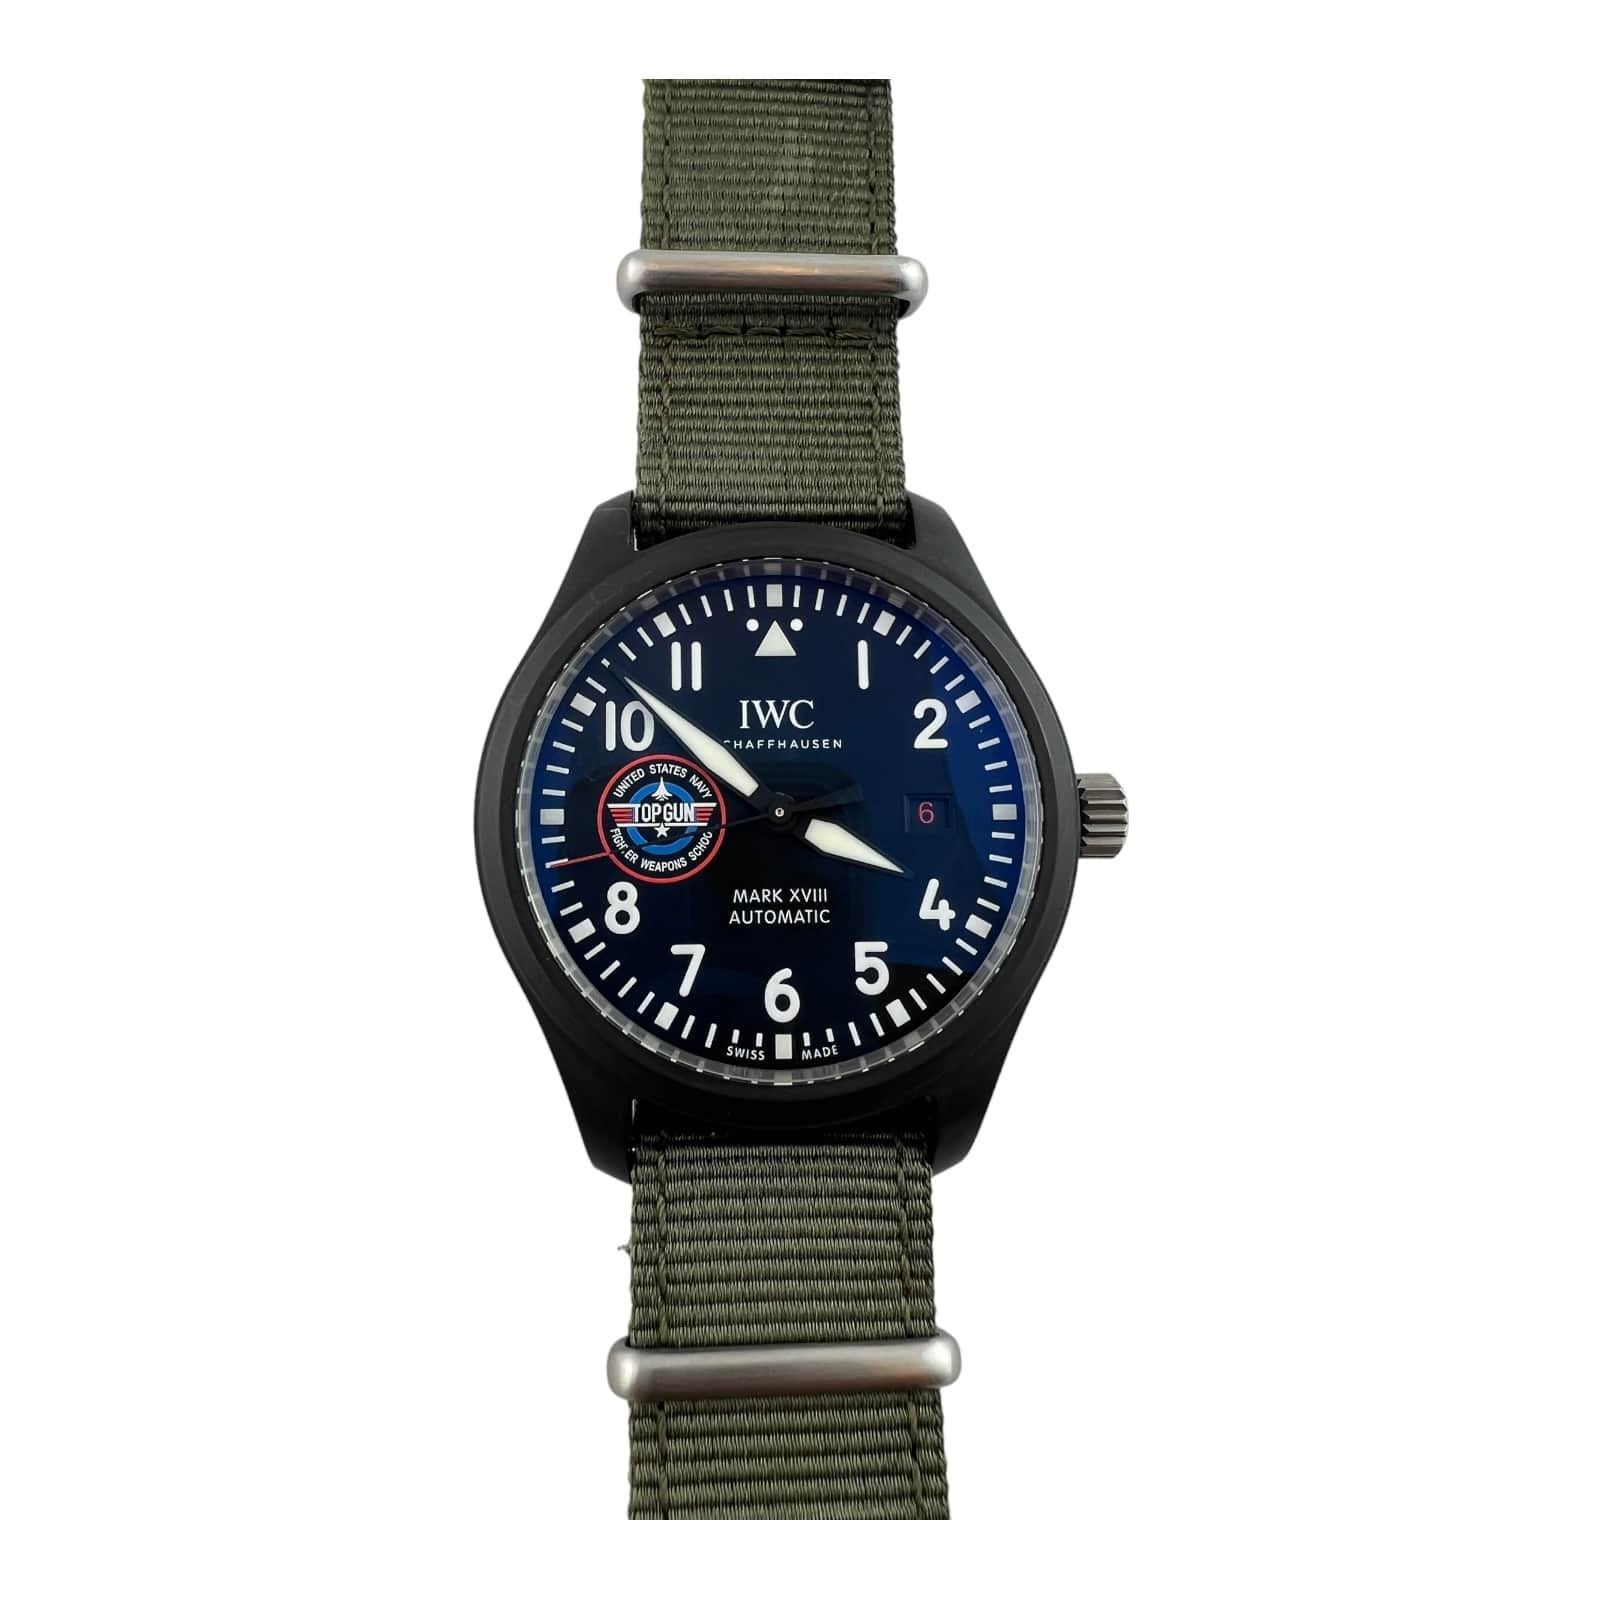 IWC Pilot's Watch Mark XVII Top Gun Watch

Model: IW324712
Serial: 6256624

This IWC watch has a ceramic case that is 41mm in diameter.

Green canvas IWC strap with steel buckle - 11